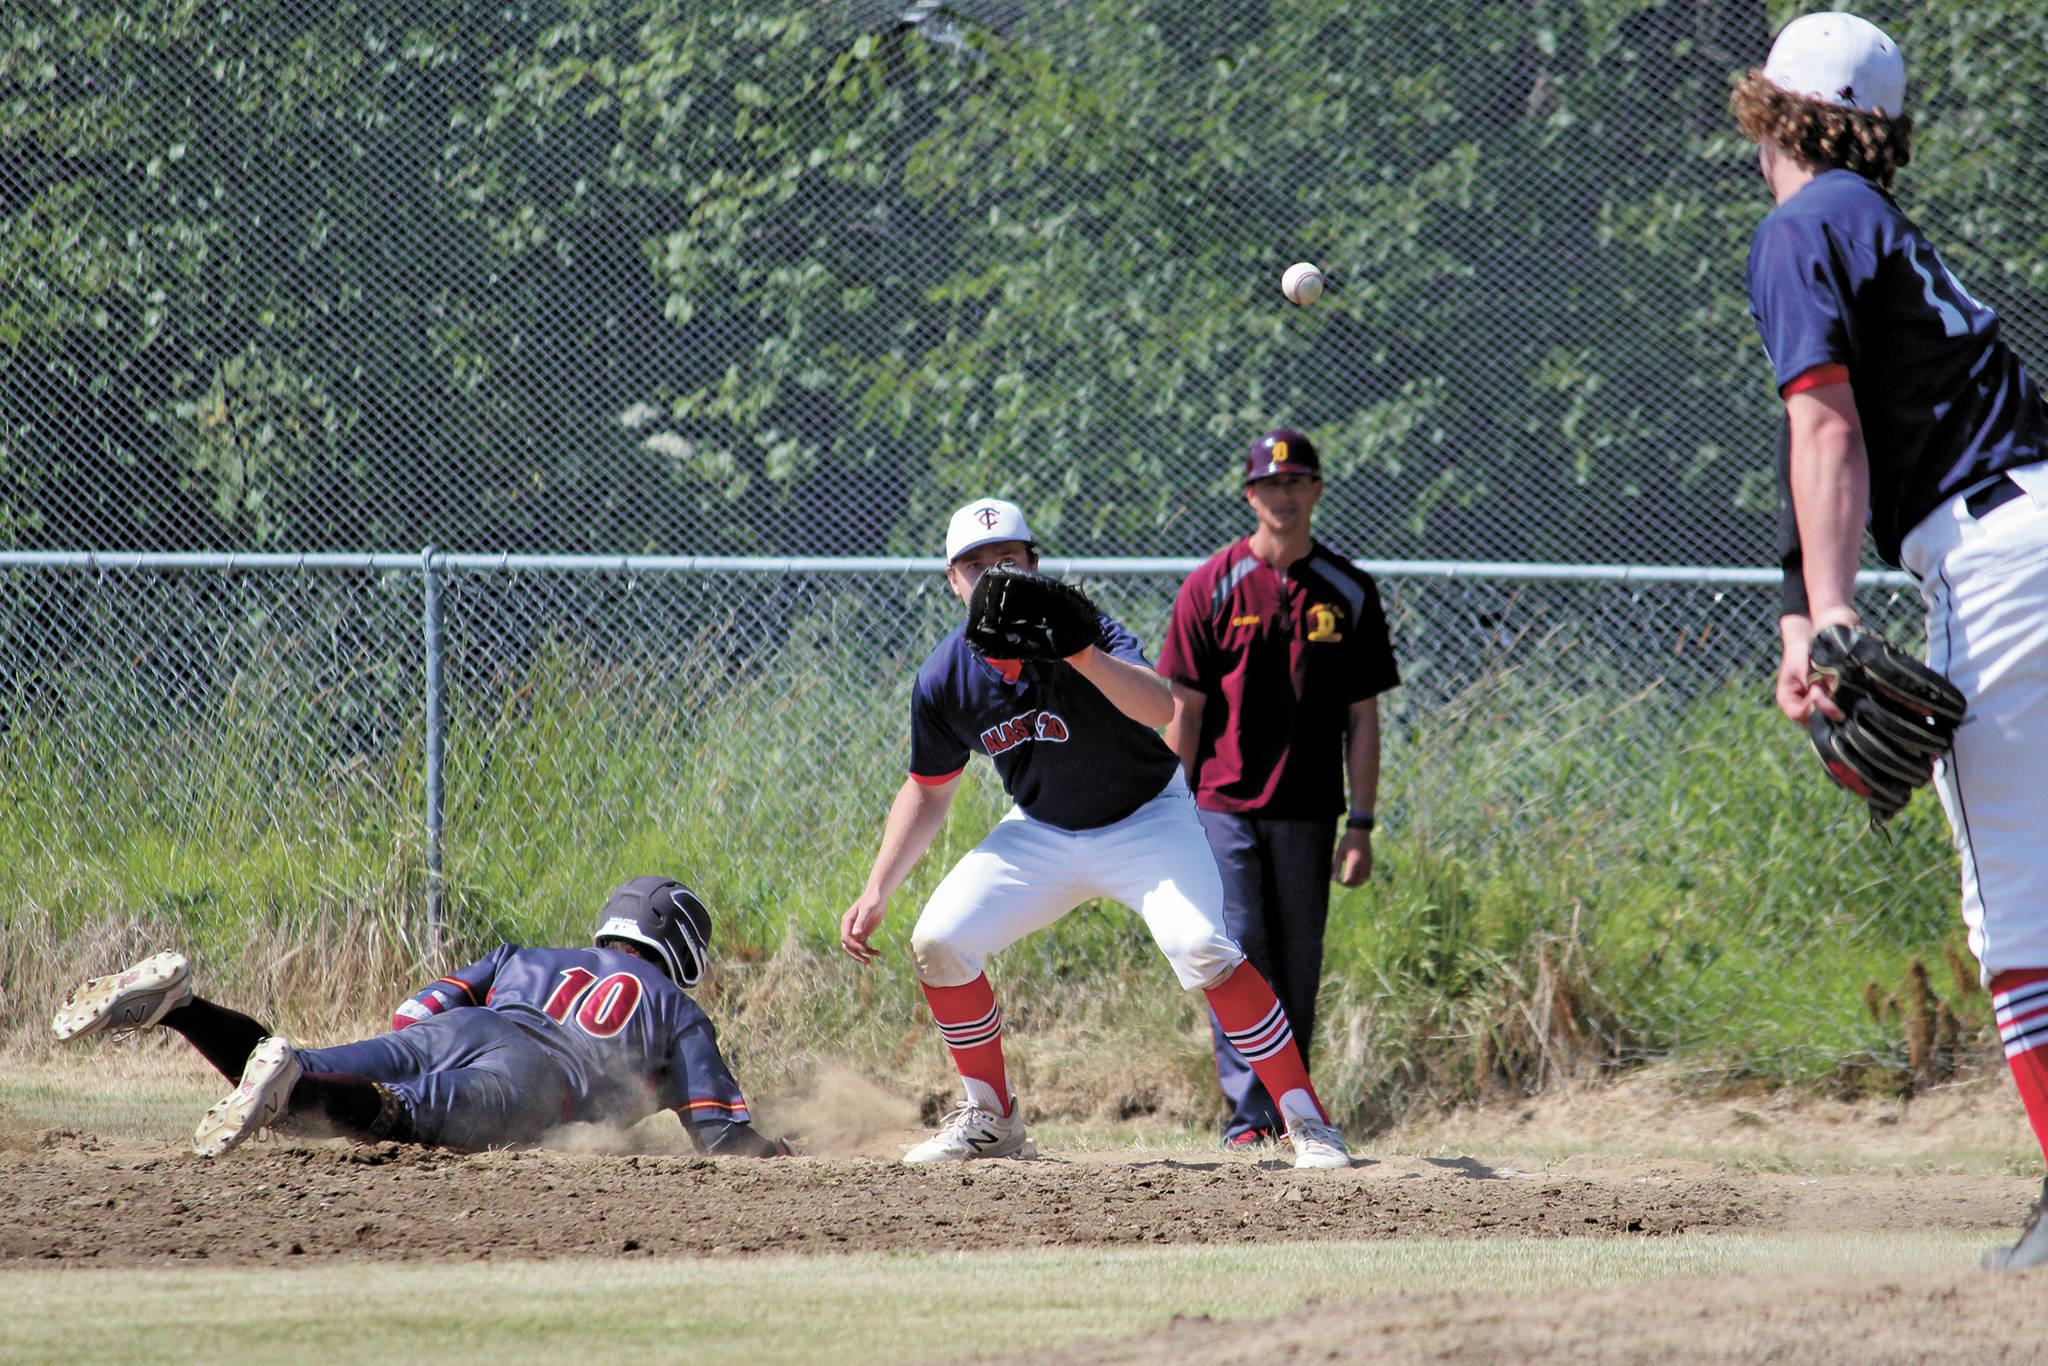 Alaska 20 pitcher Mose Hayes throws the ball to teammate Tanner Ussing while Dimond player Logan Sweet dives back onto first base during a Saturday, July 4, 2020 Alliance Baseball League game at Karen Hornaday Park in Homer, Alaska. (Photo by Megan Pacer/Homer News)